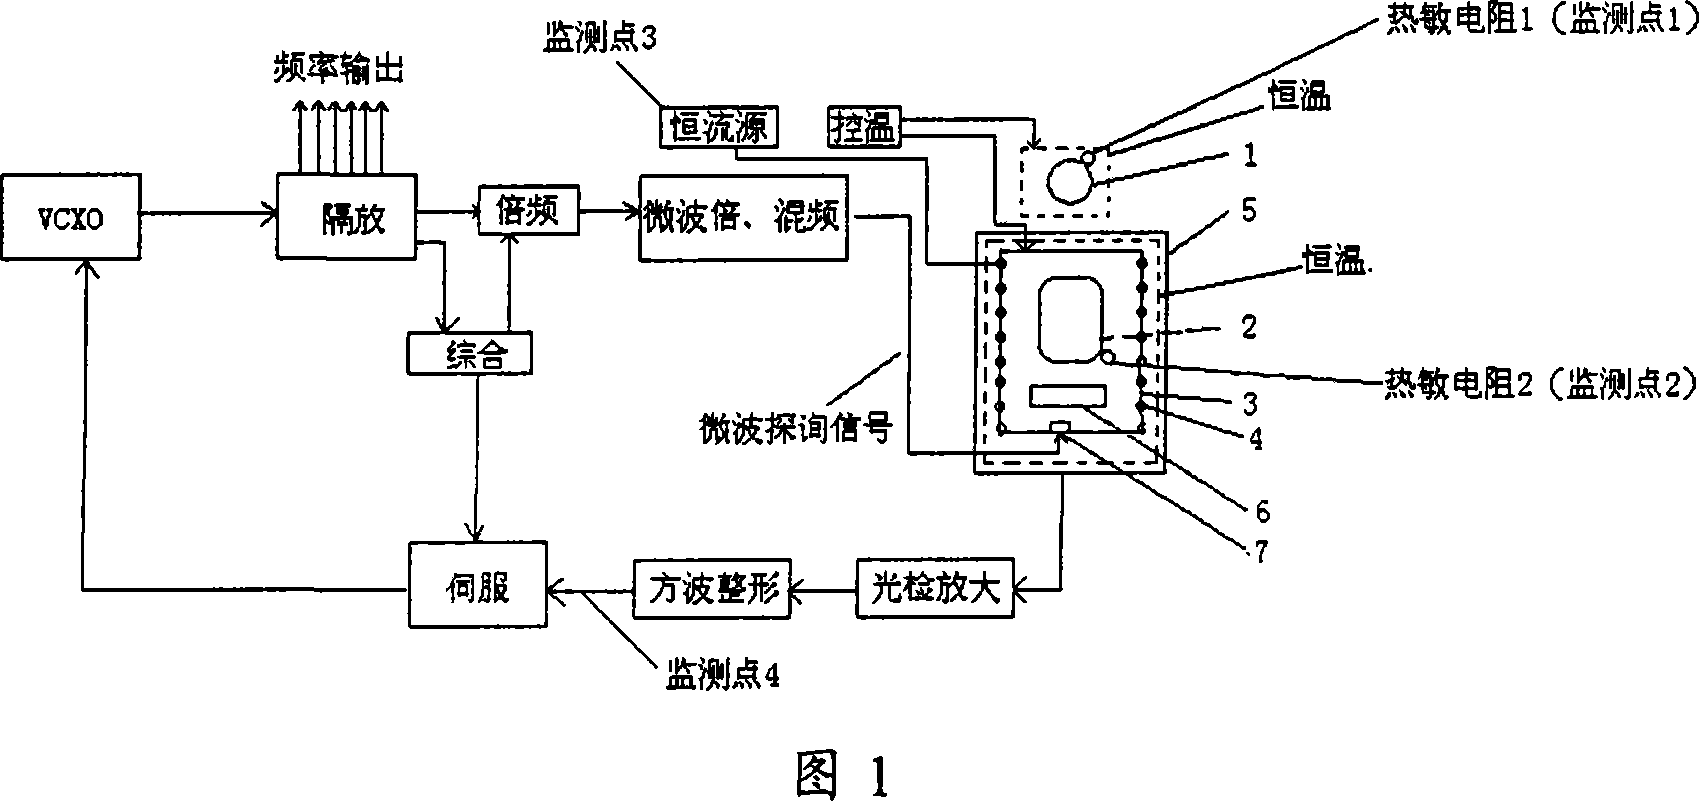 Passive Rb atom frequency standard locking indication and fault diagnosis method